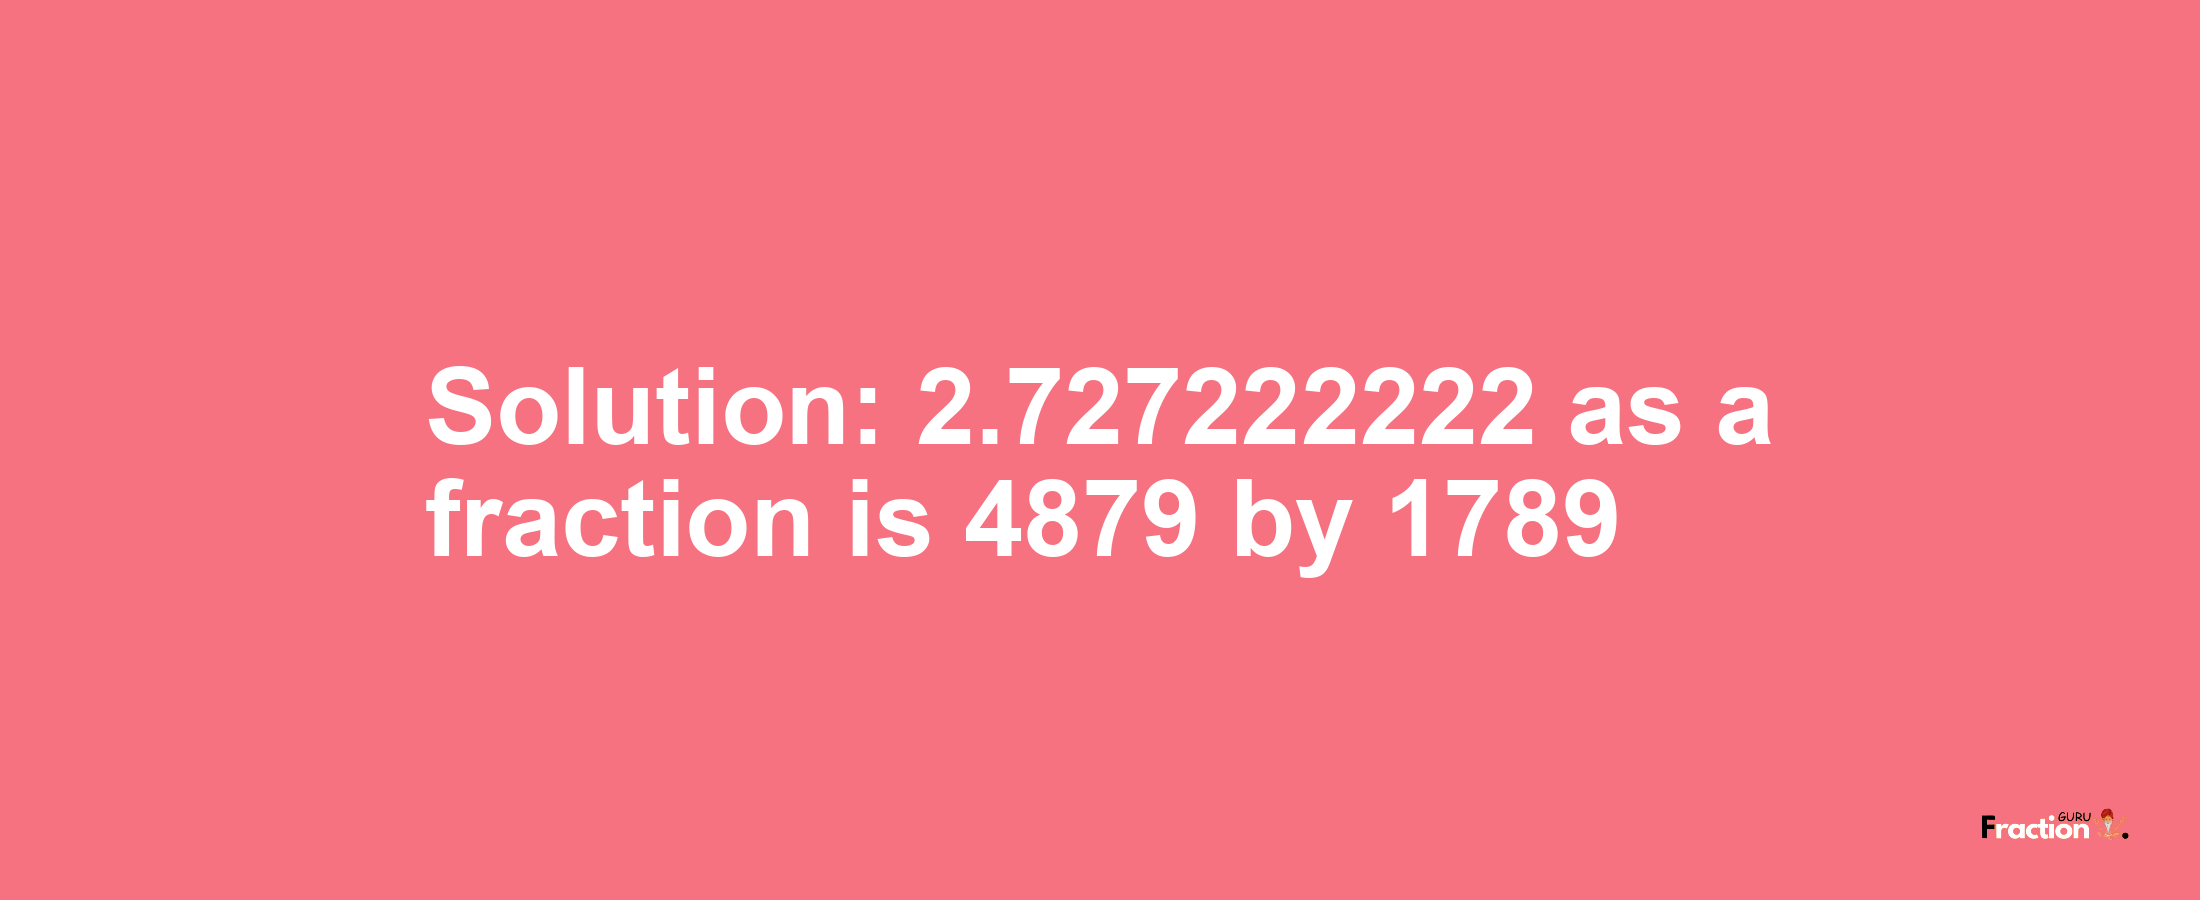 Solution:2.727222222 as a fraction is 4879/1789